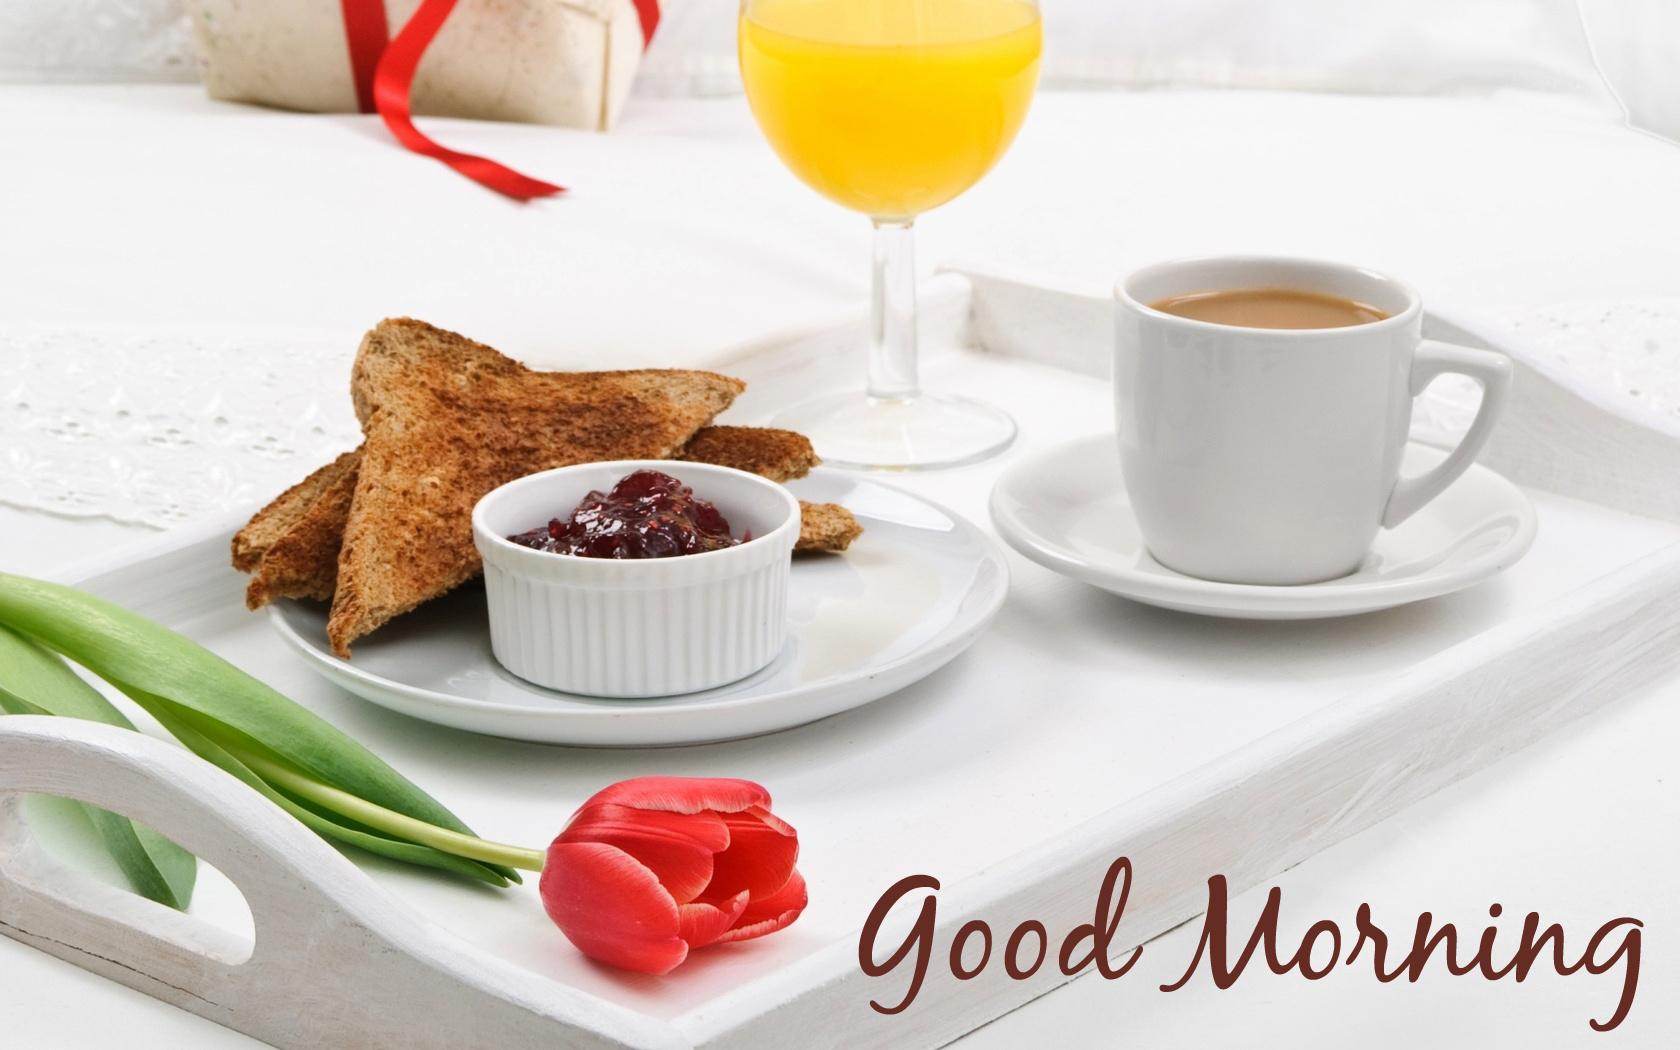 New Morning Good Day HD Wallpaper wishes Image